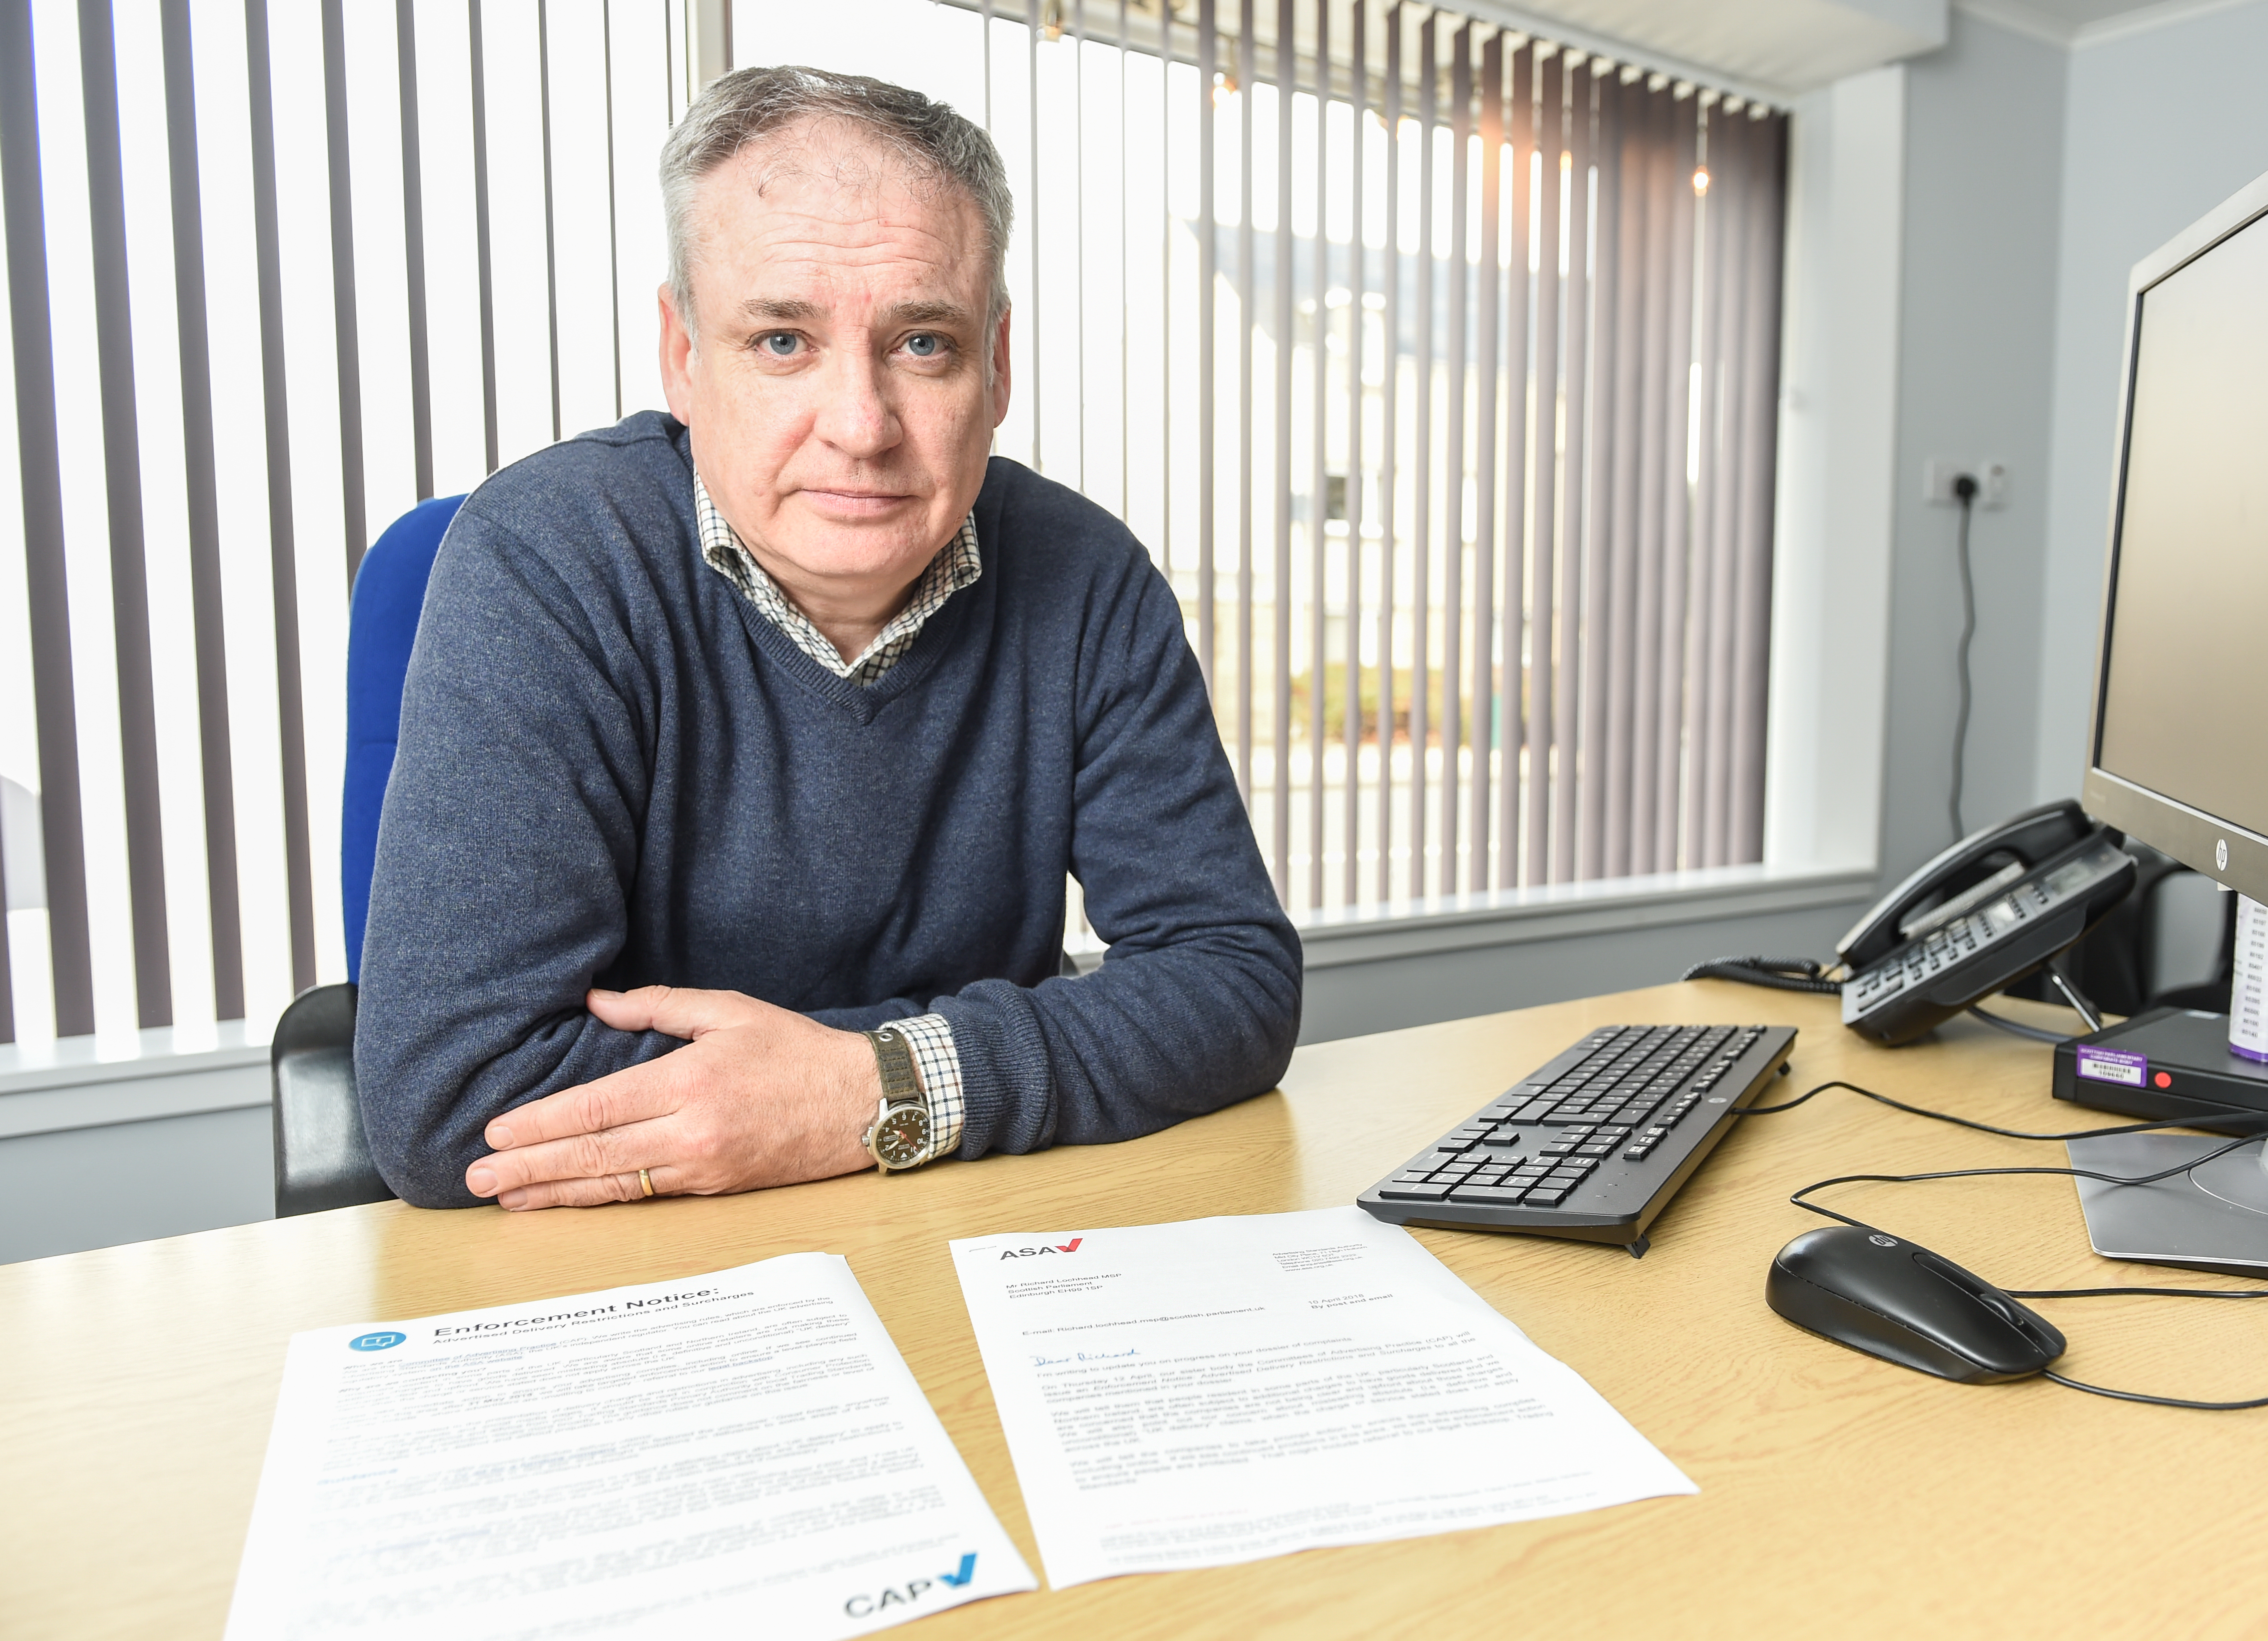 Moray MSP Richard Lochhead has long campaigned for fairer delivery charges.